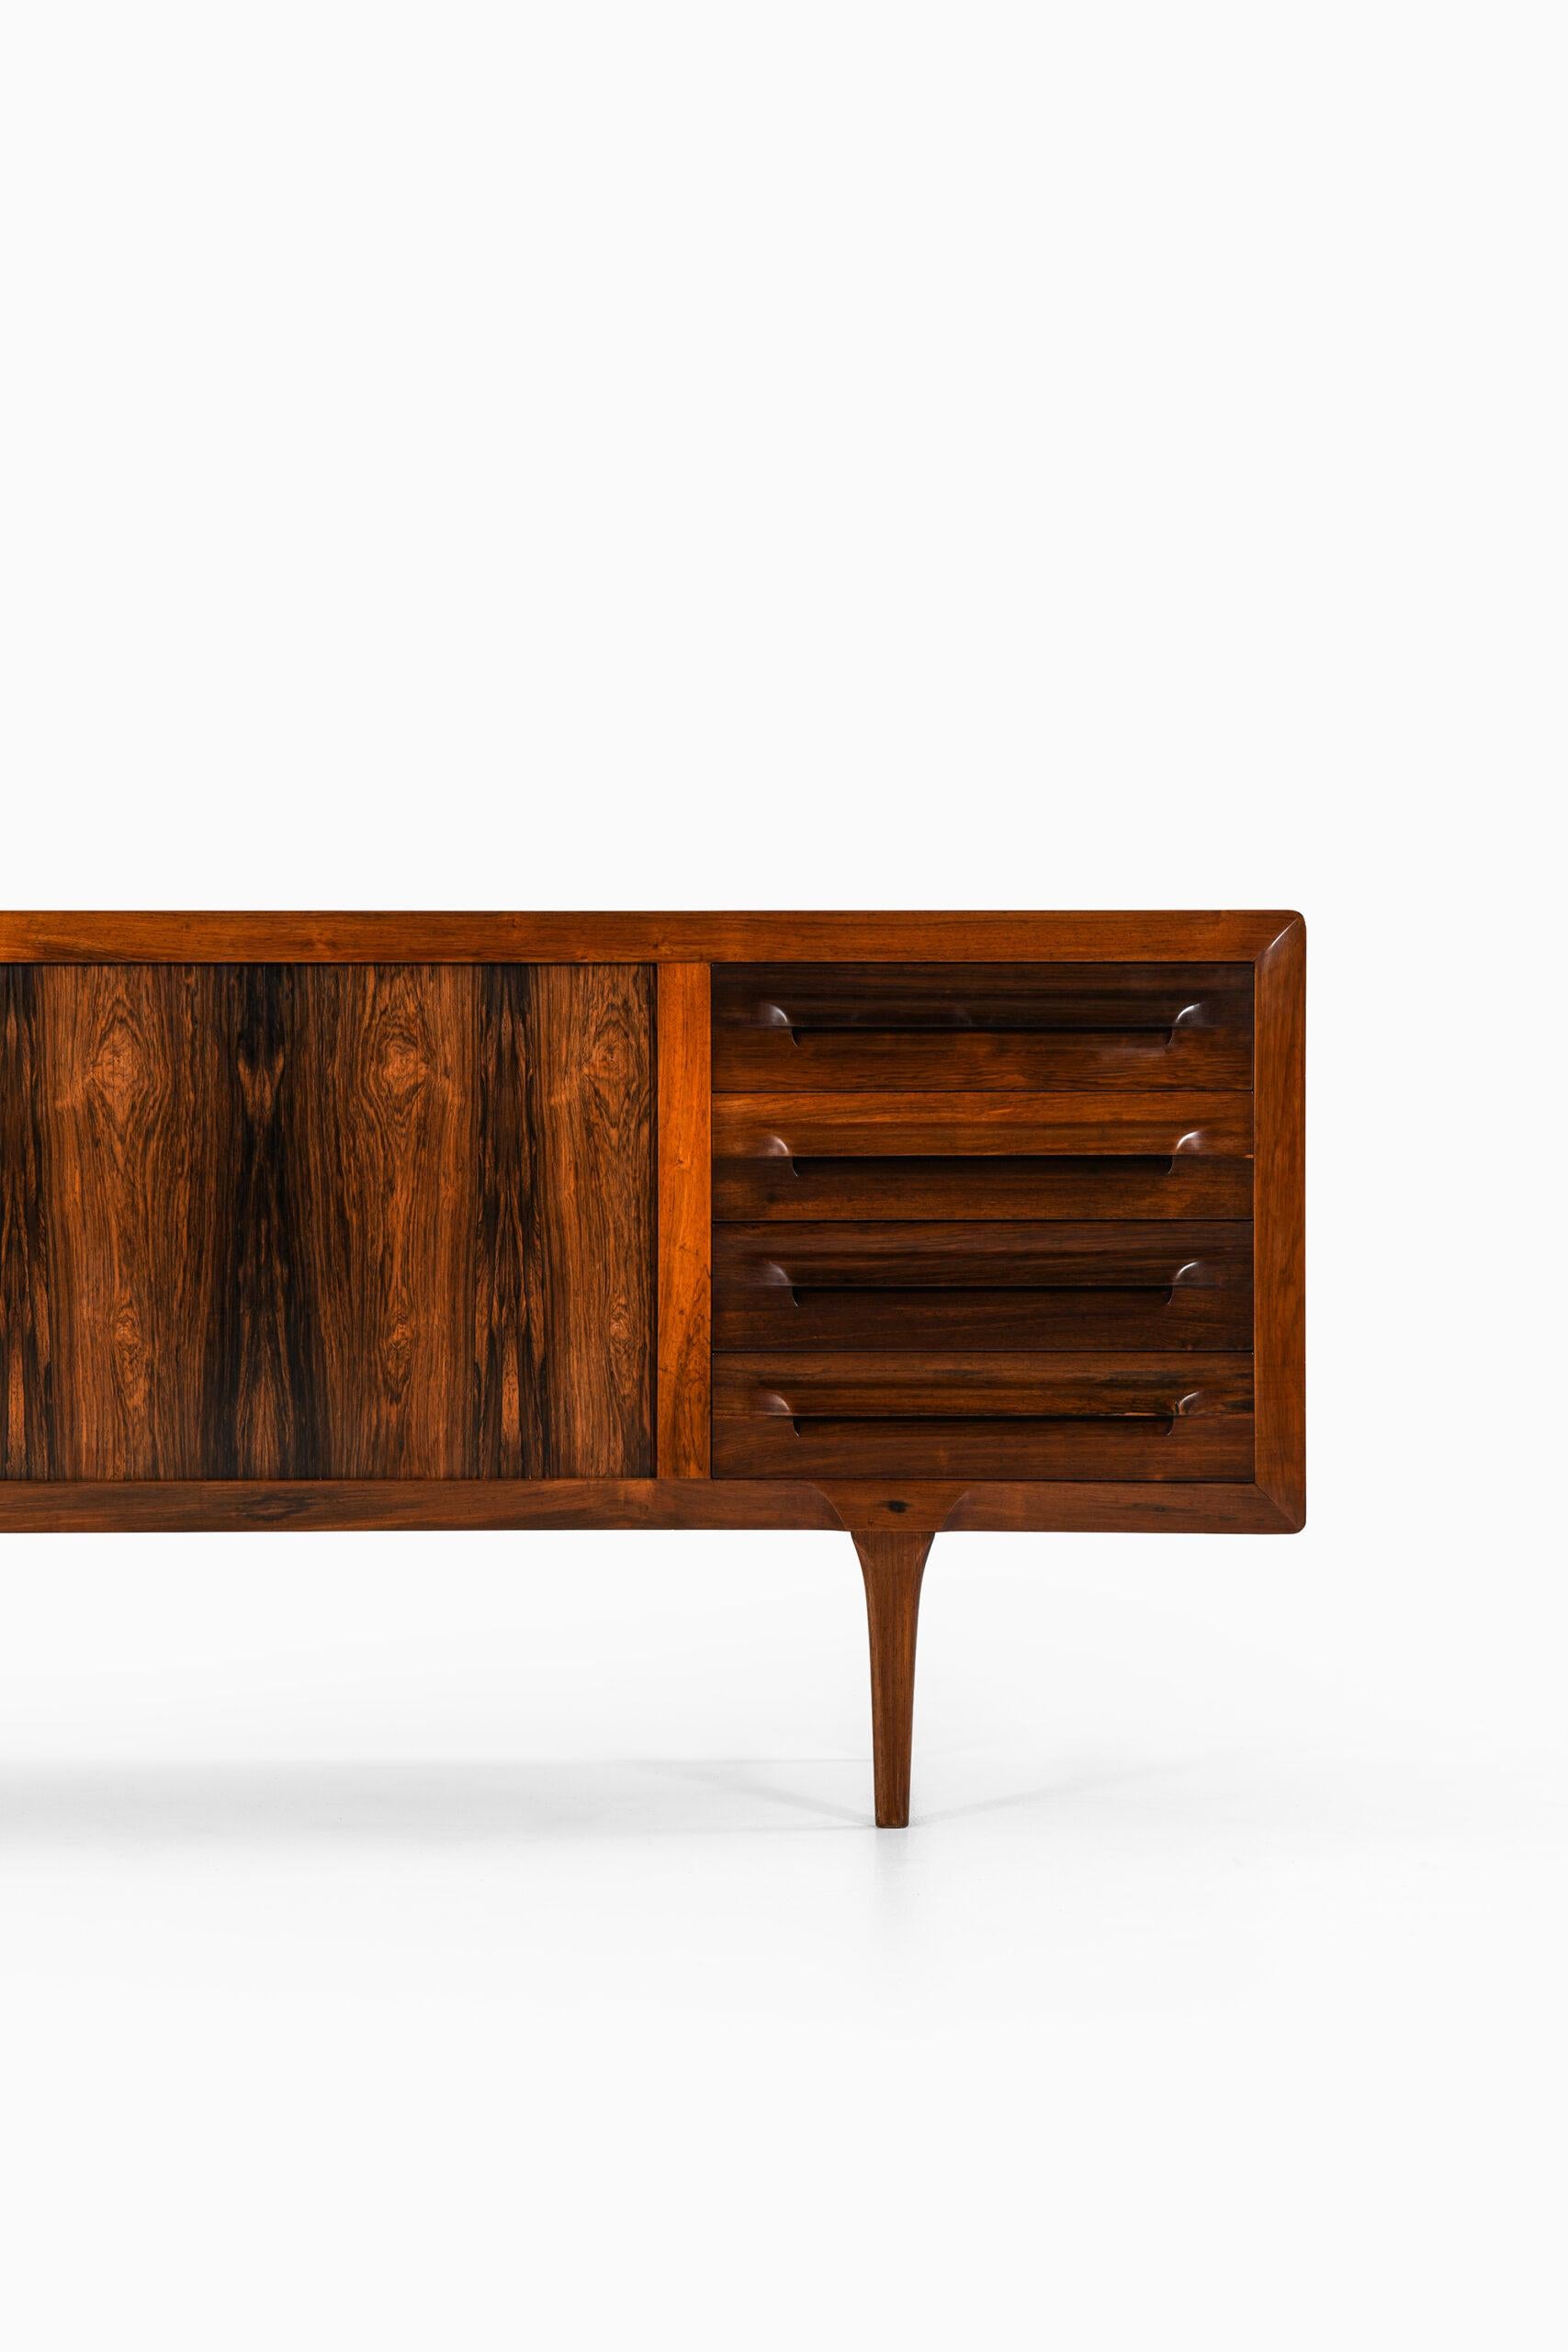 Very rare and freestanding sideboard model FA-33 designed by Ib Kofod-Larsen. Produced by Faarup Møbelfabrik in Denmark.